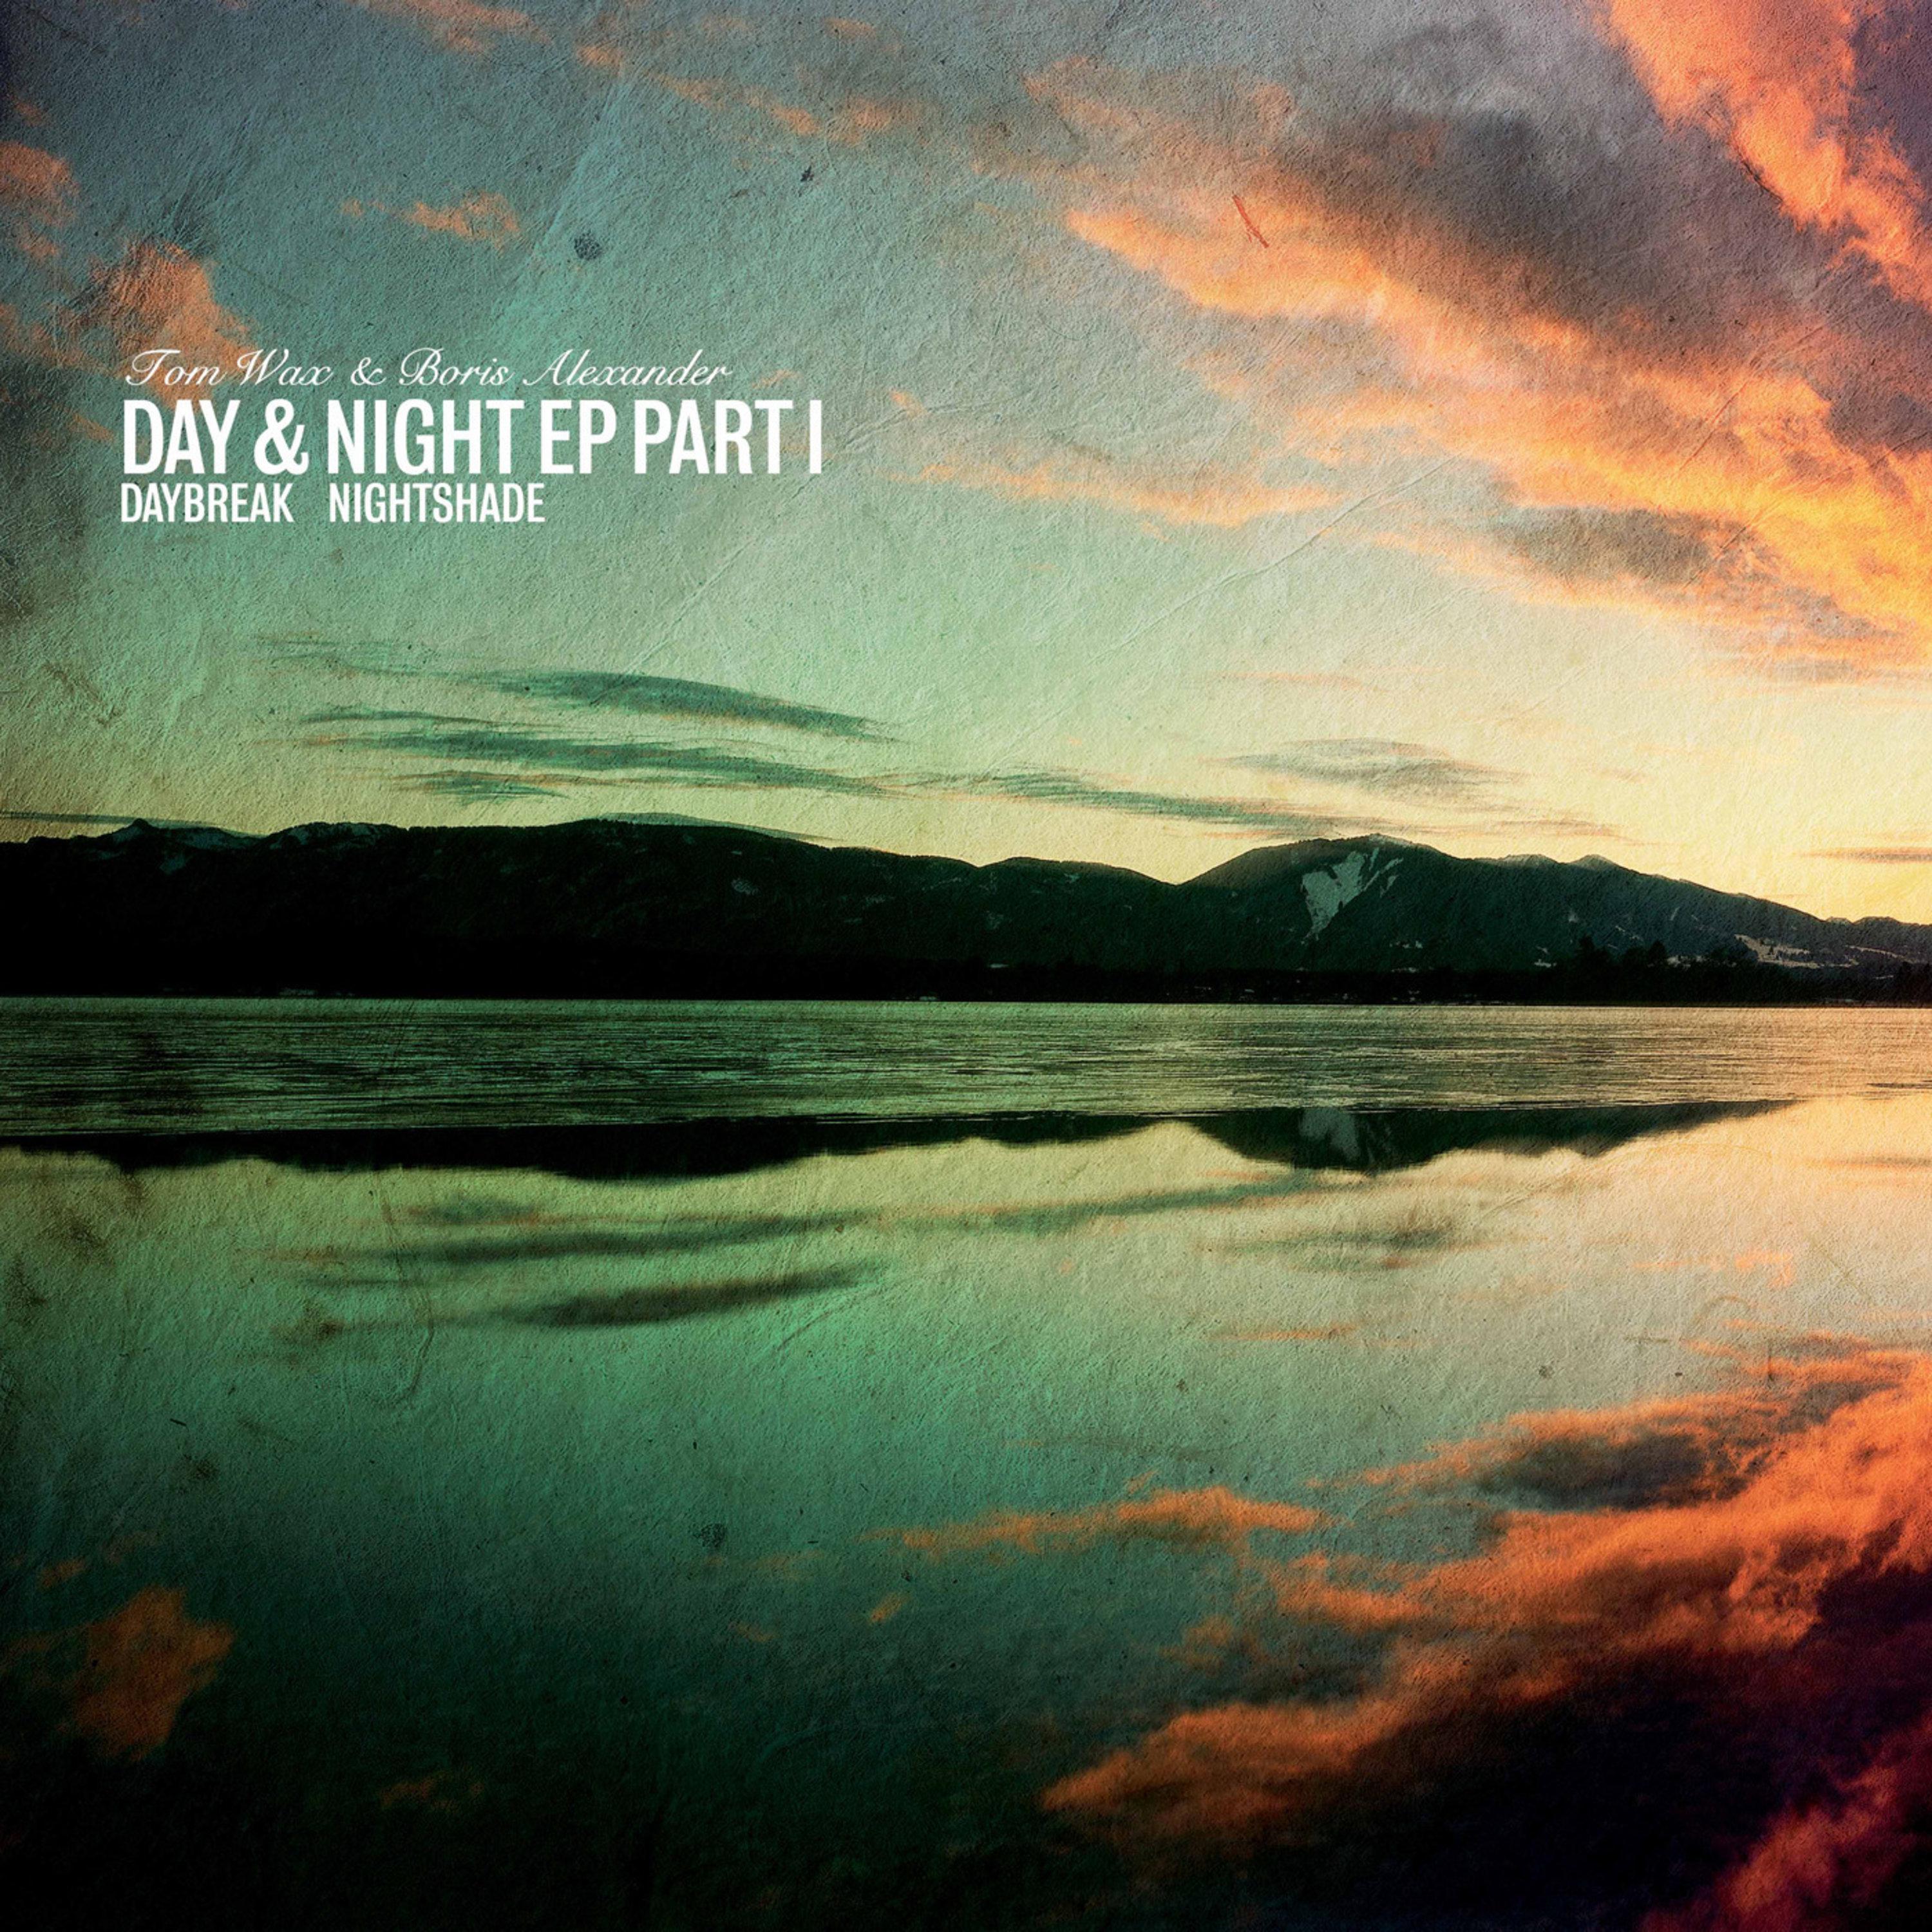 Day & Night EP Part 1